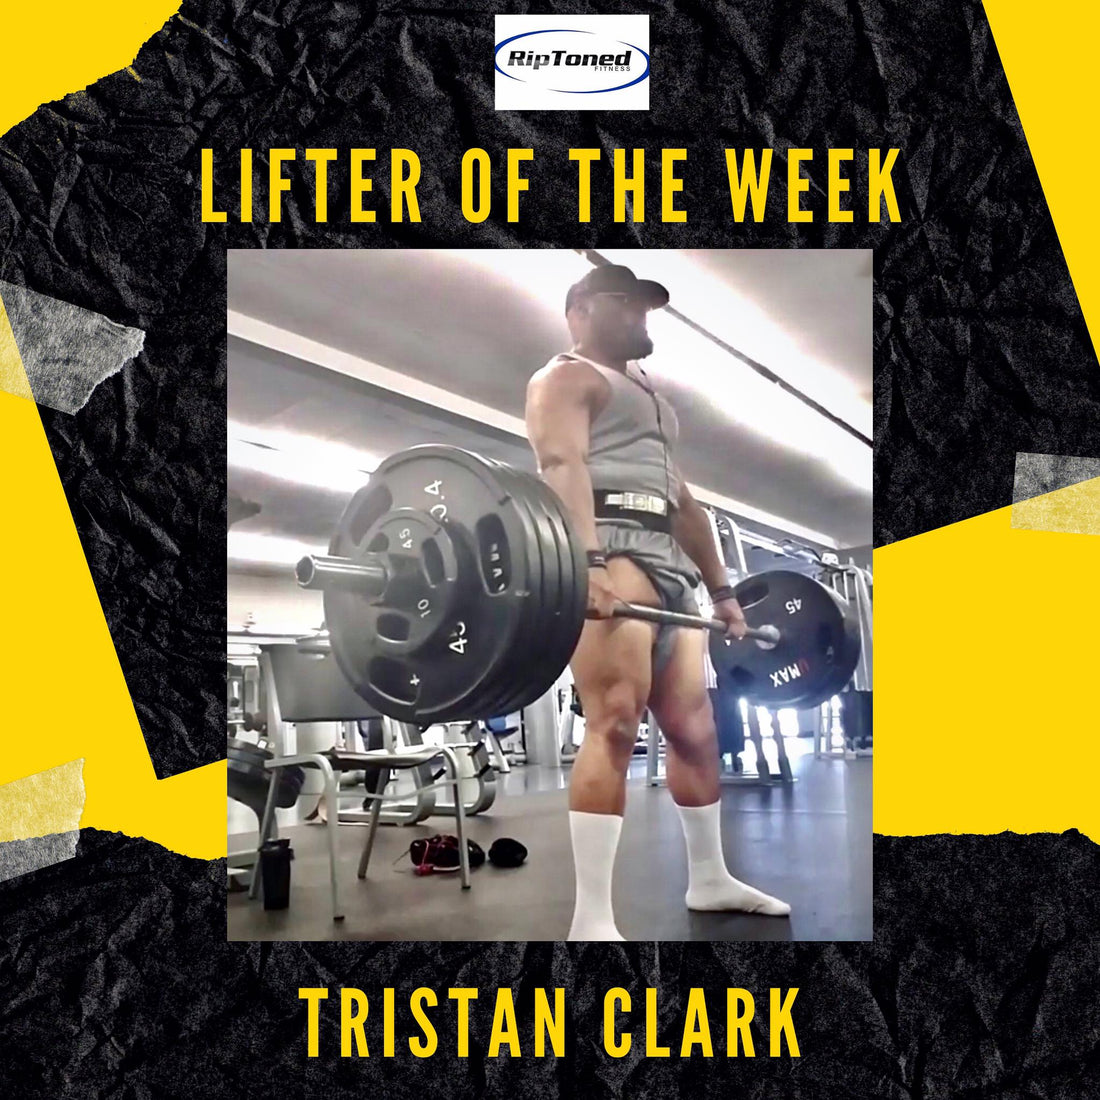 Lifter of the Week -  Tristan Clark - Rip Toned